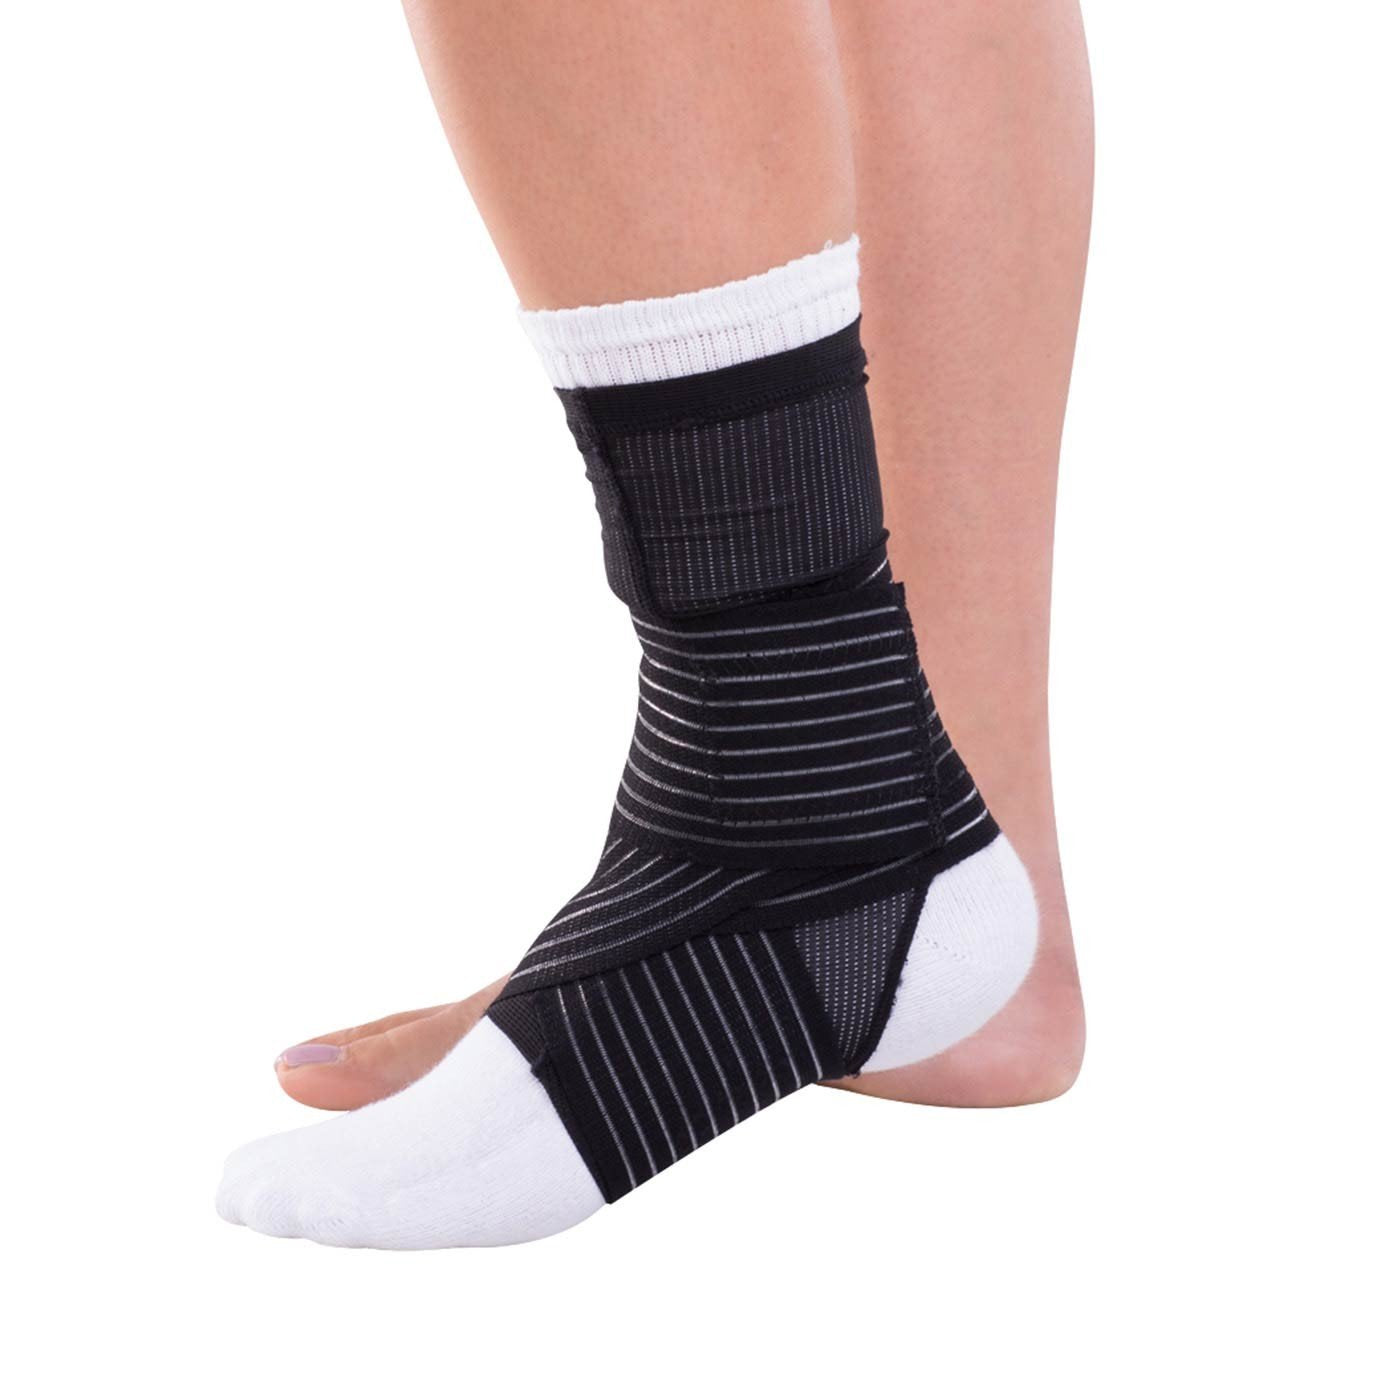 Importikaah-Elastic-Breathable-Ankle-Support-brace